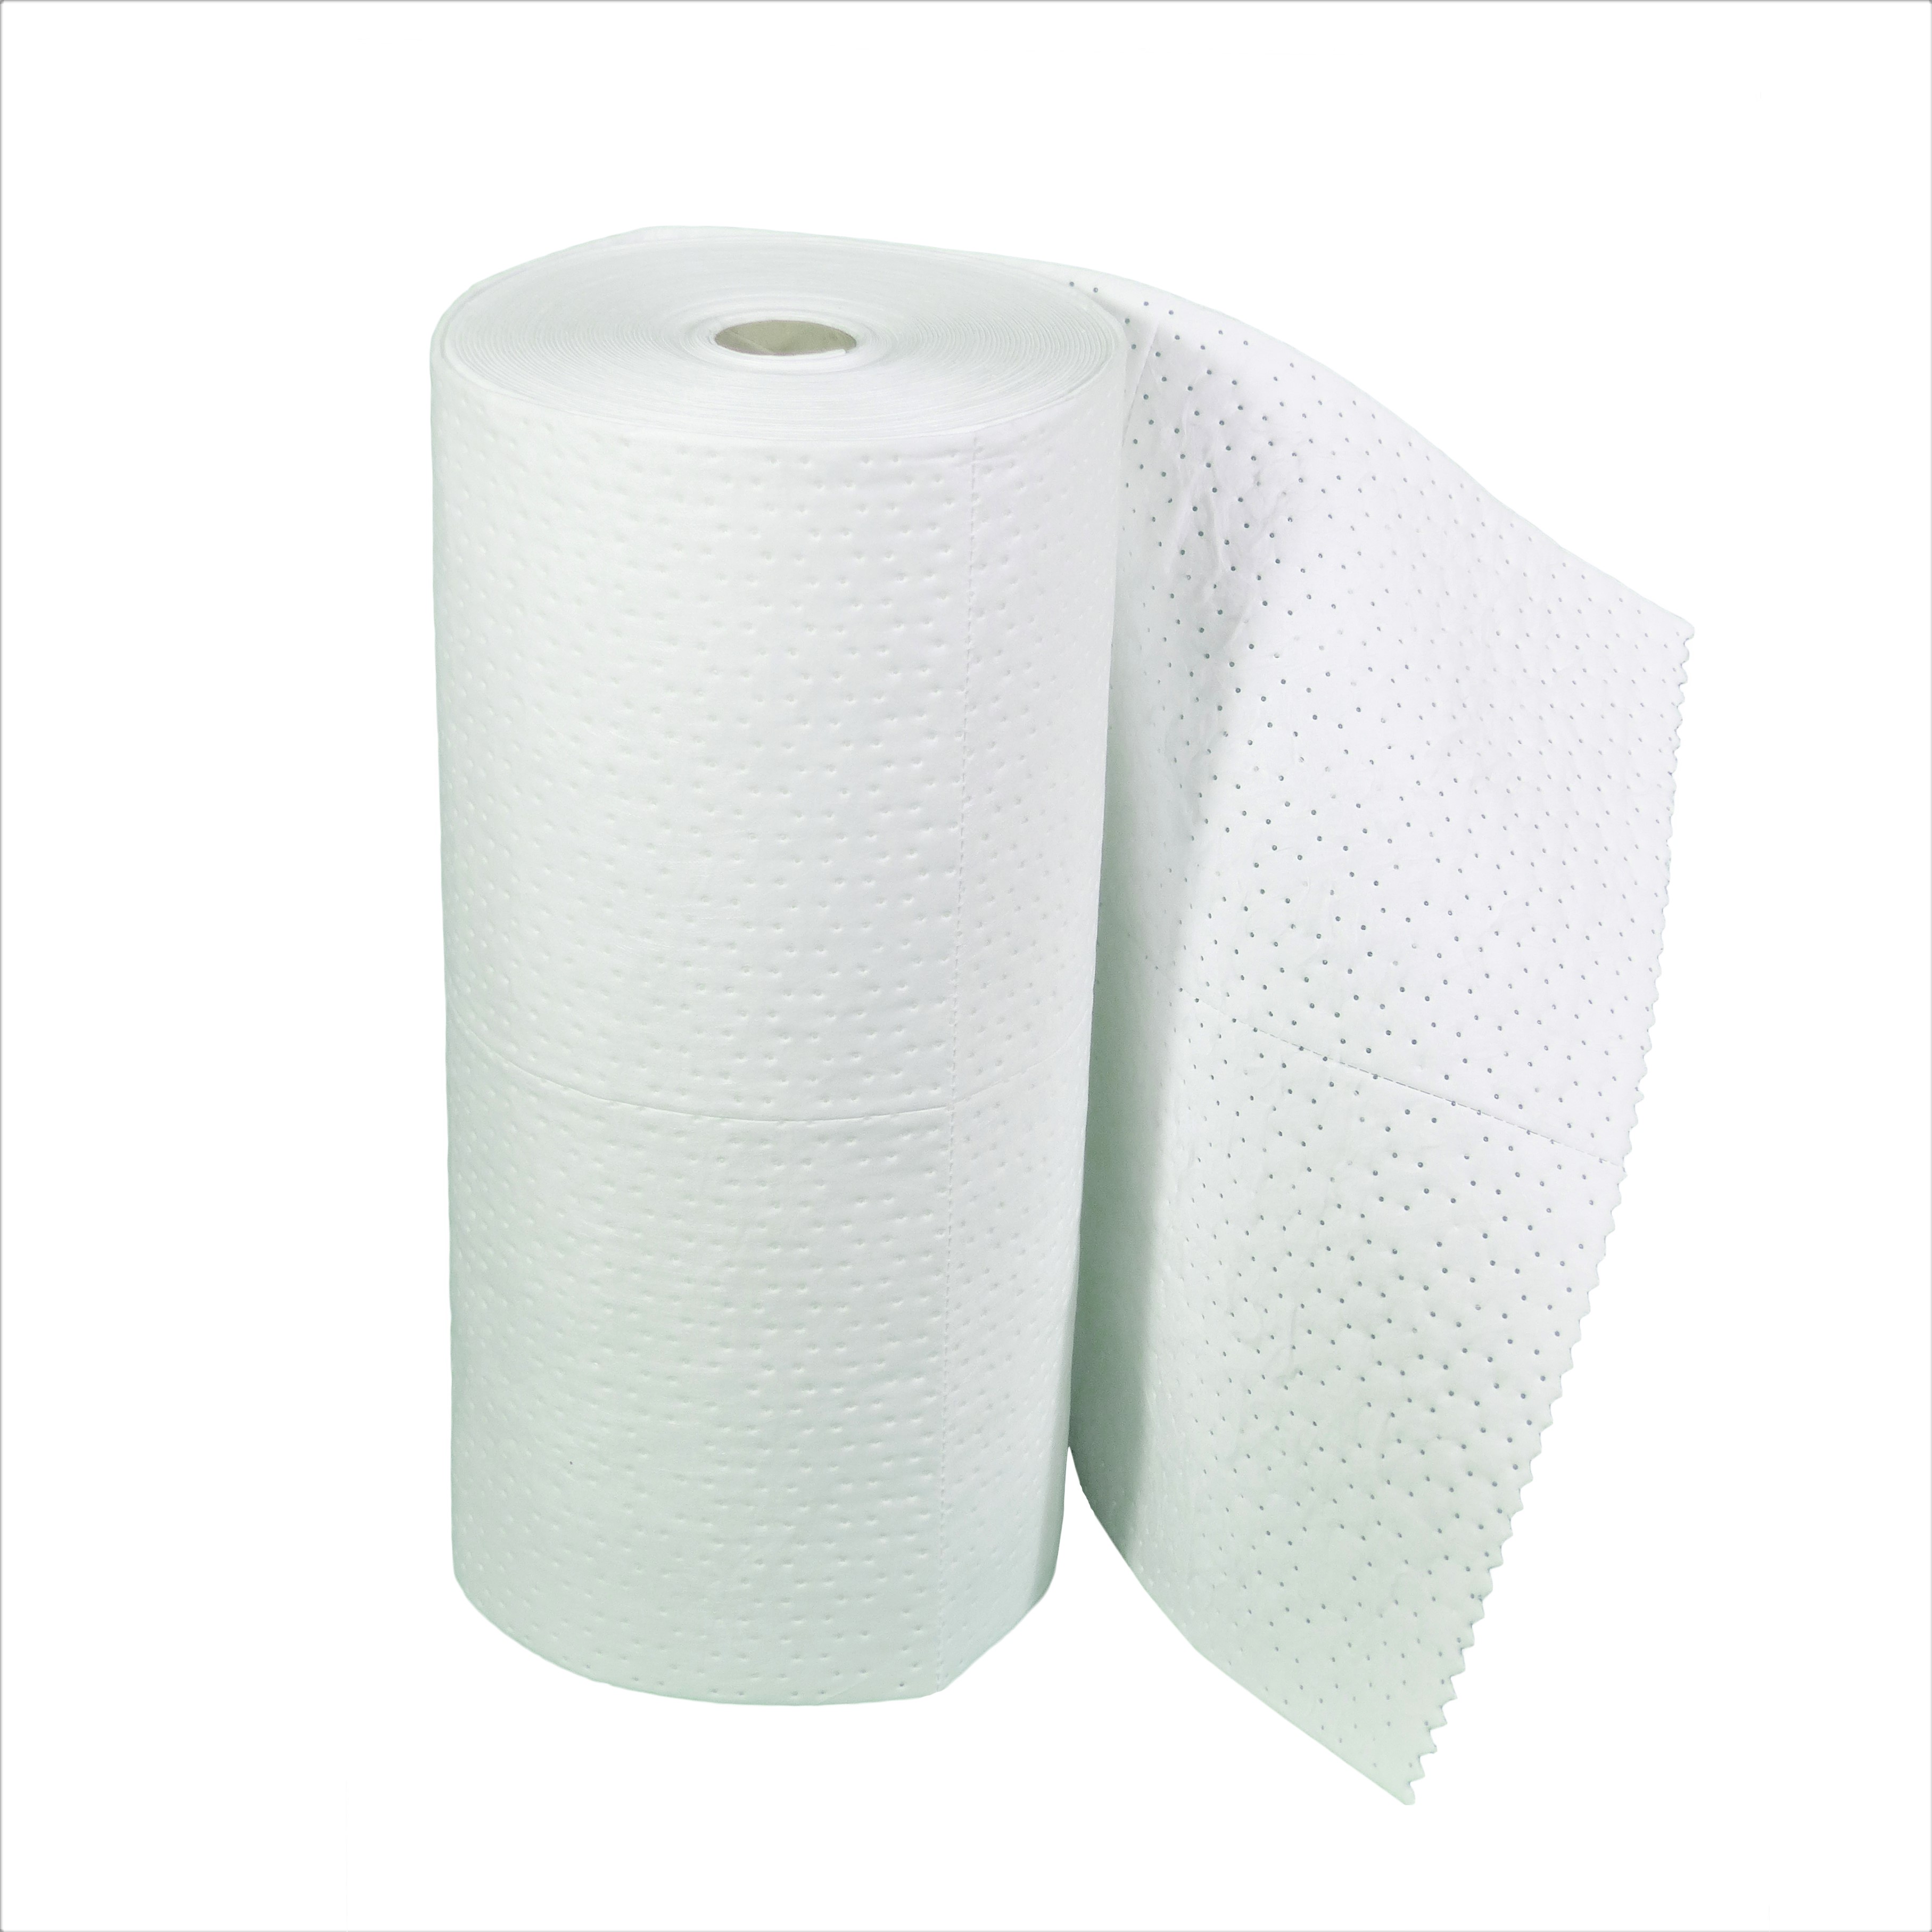 ICOSORB&#174; SM HEAVY white as a roll